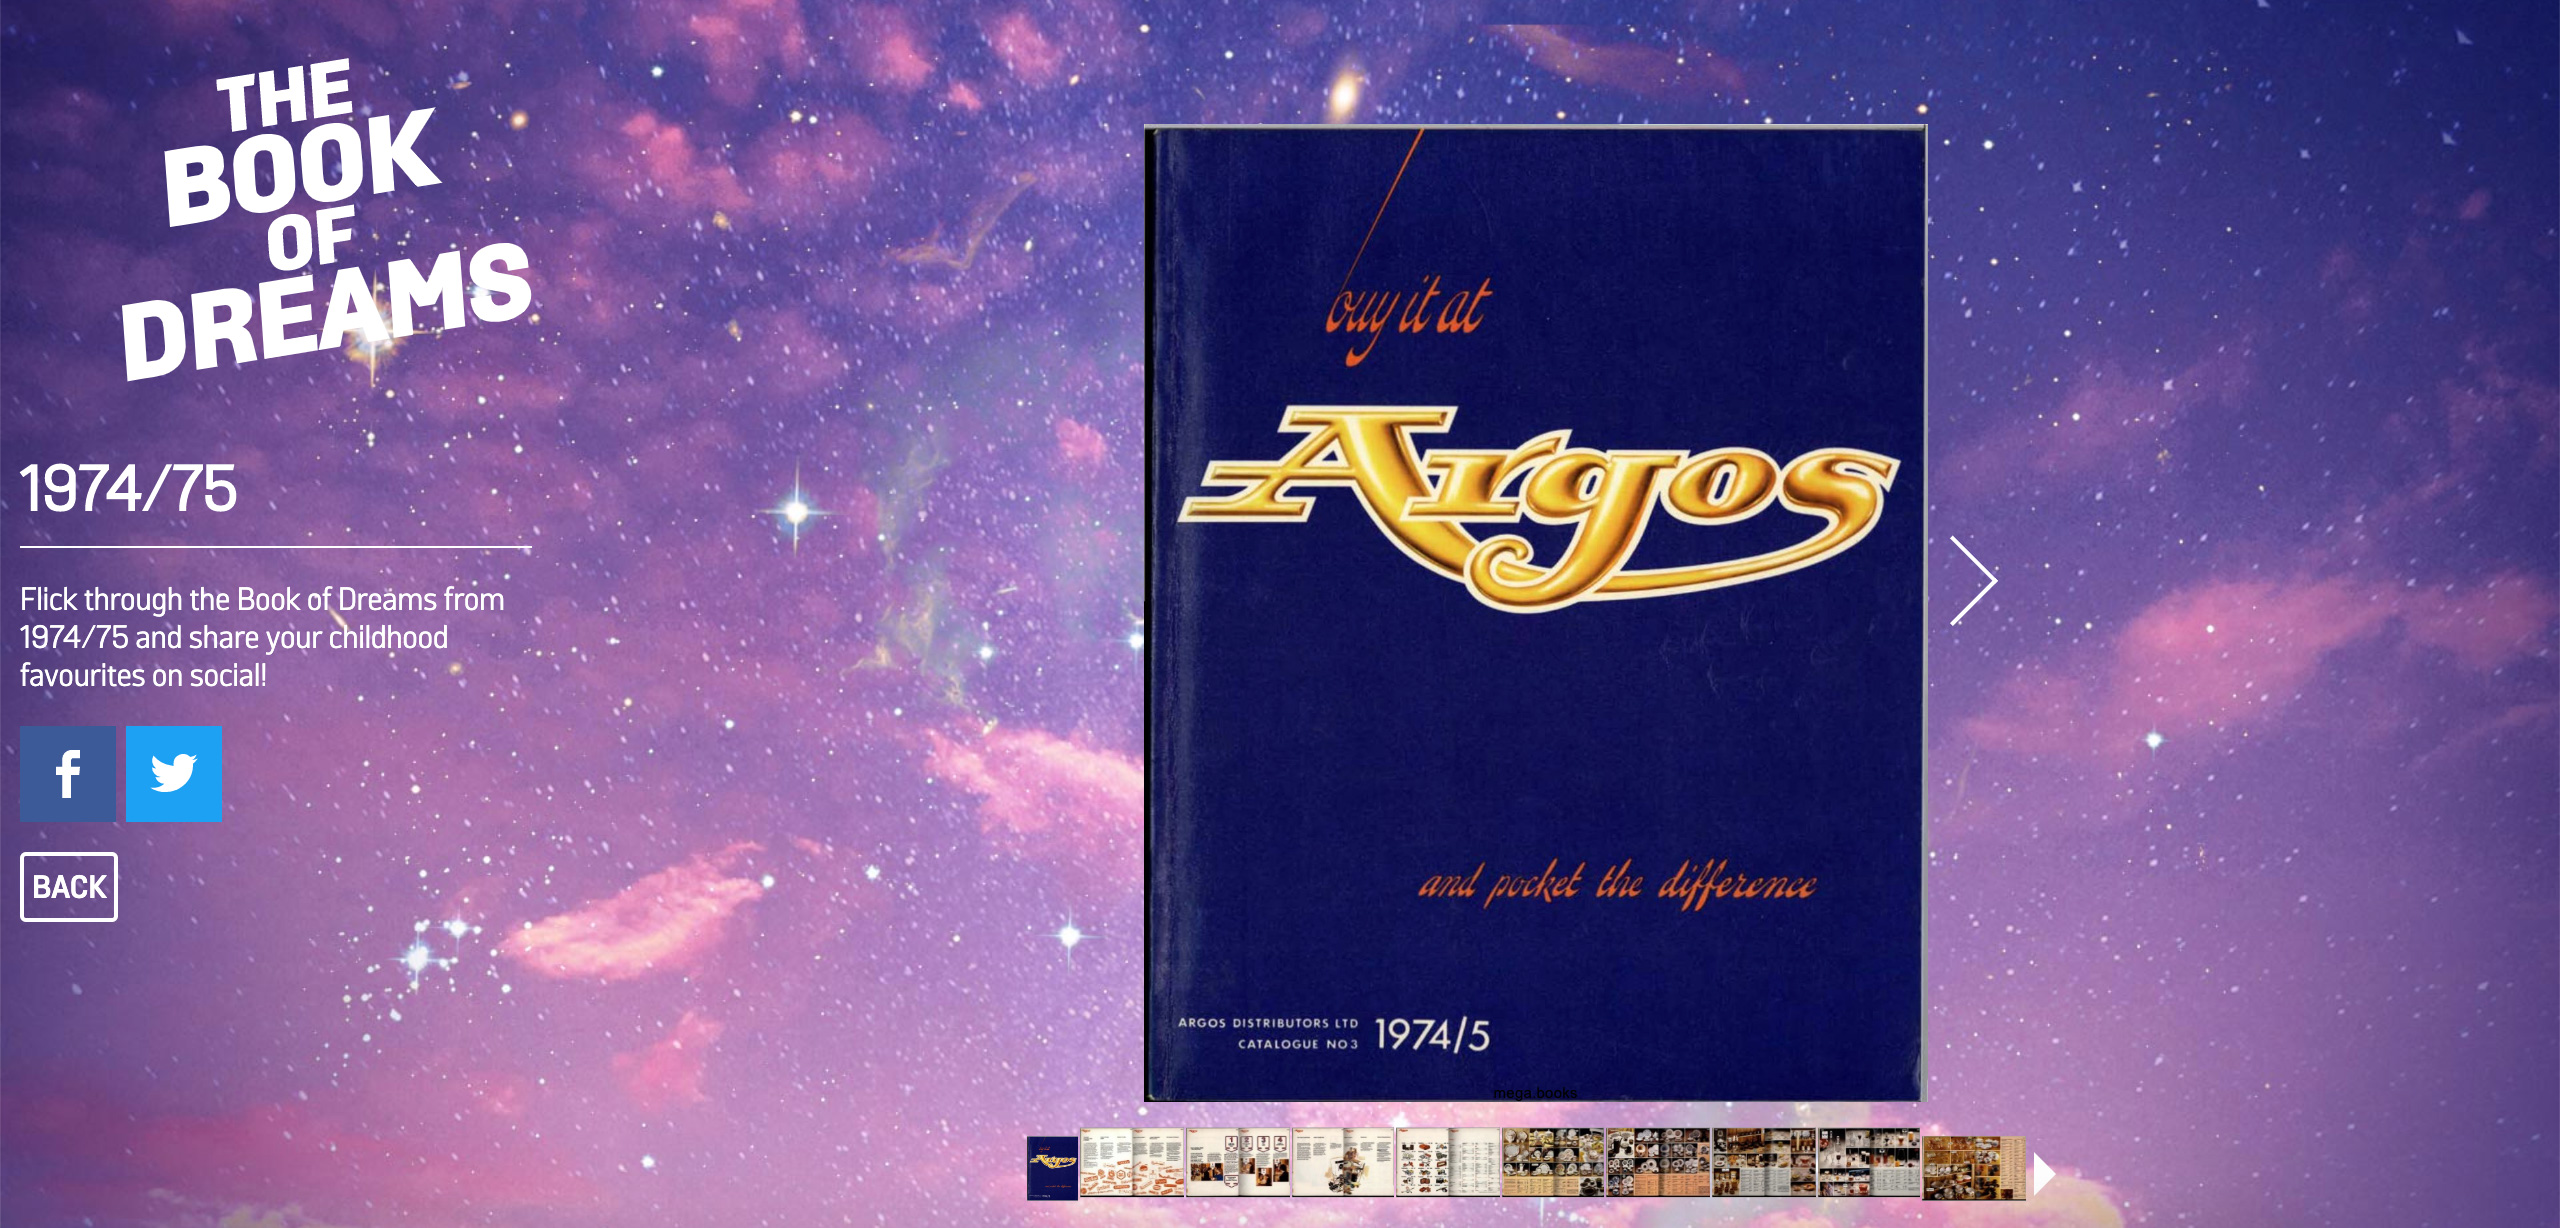 Argos' 70s book of dreams as a part of christmas campaign